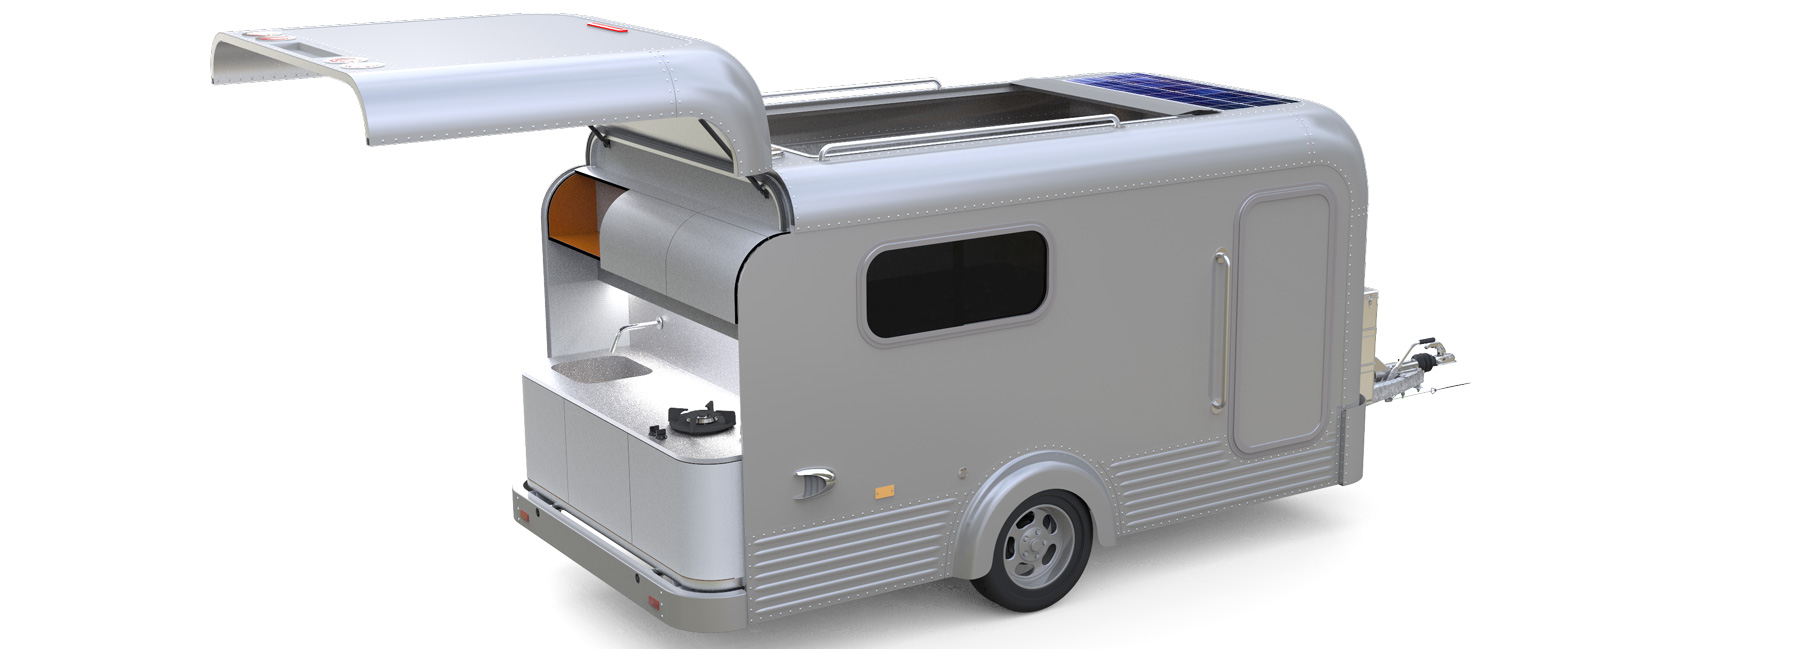 this aluminum camper comes with a panoramic open roof that lets you sleep under the stars